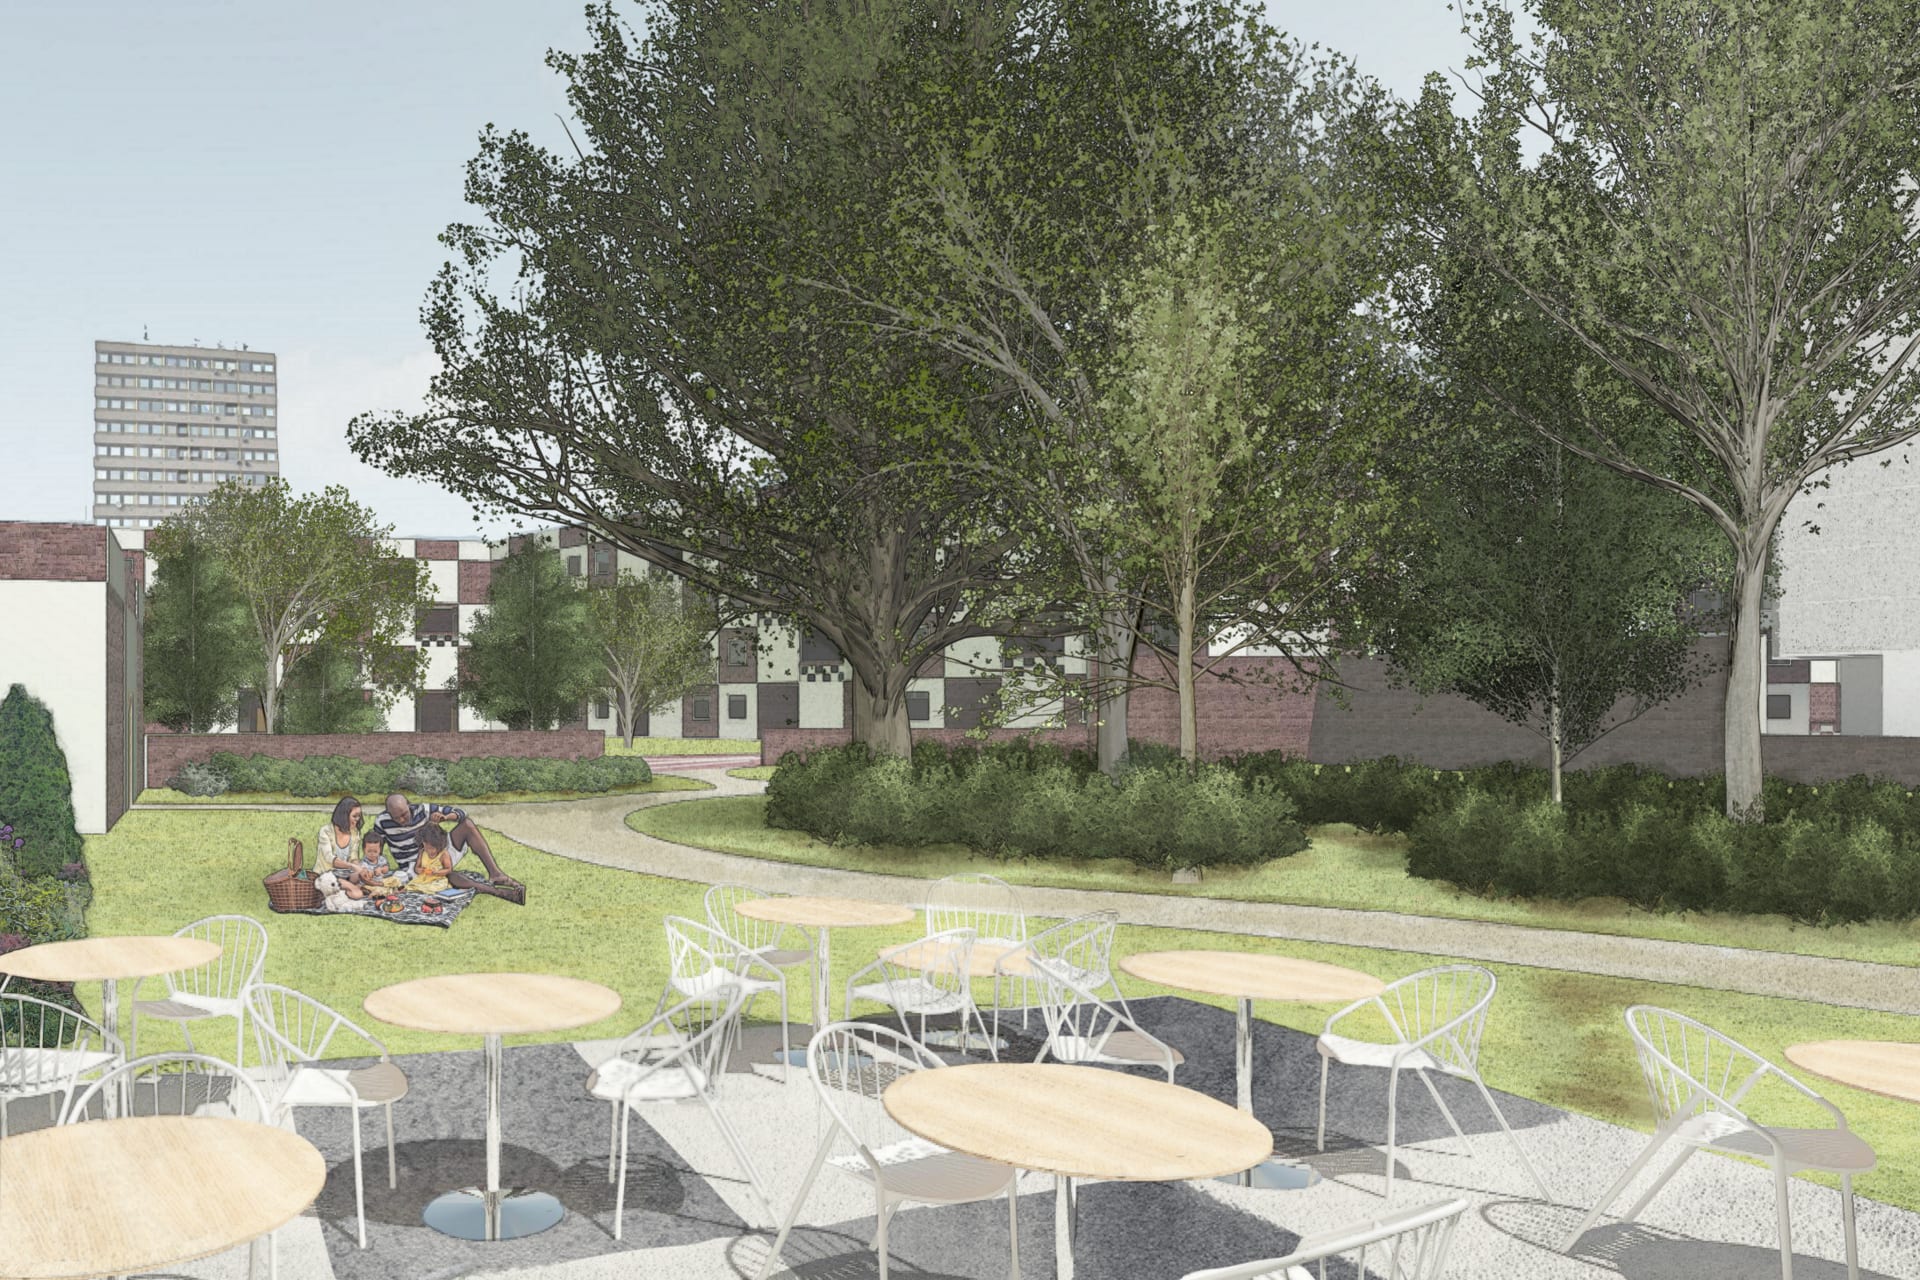 Perspective showing structured café and garden space within the park, within the 'walls', own work.